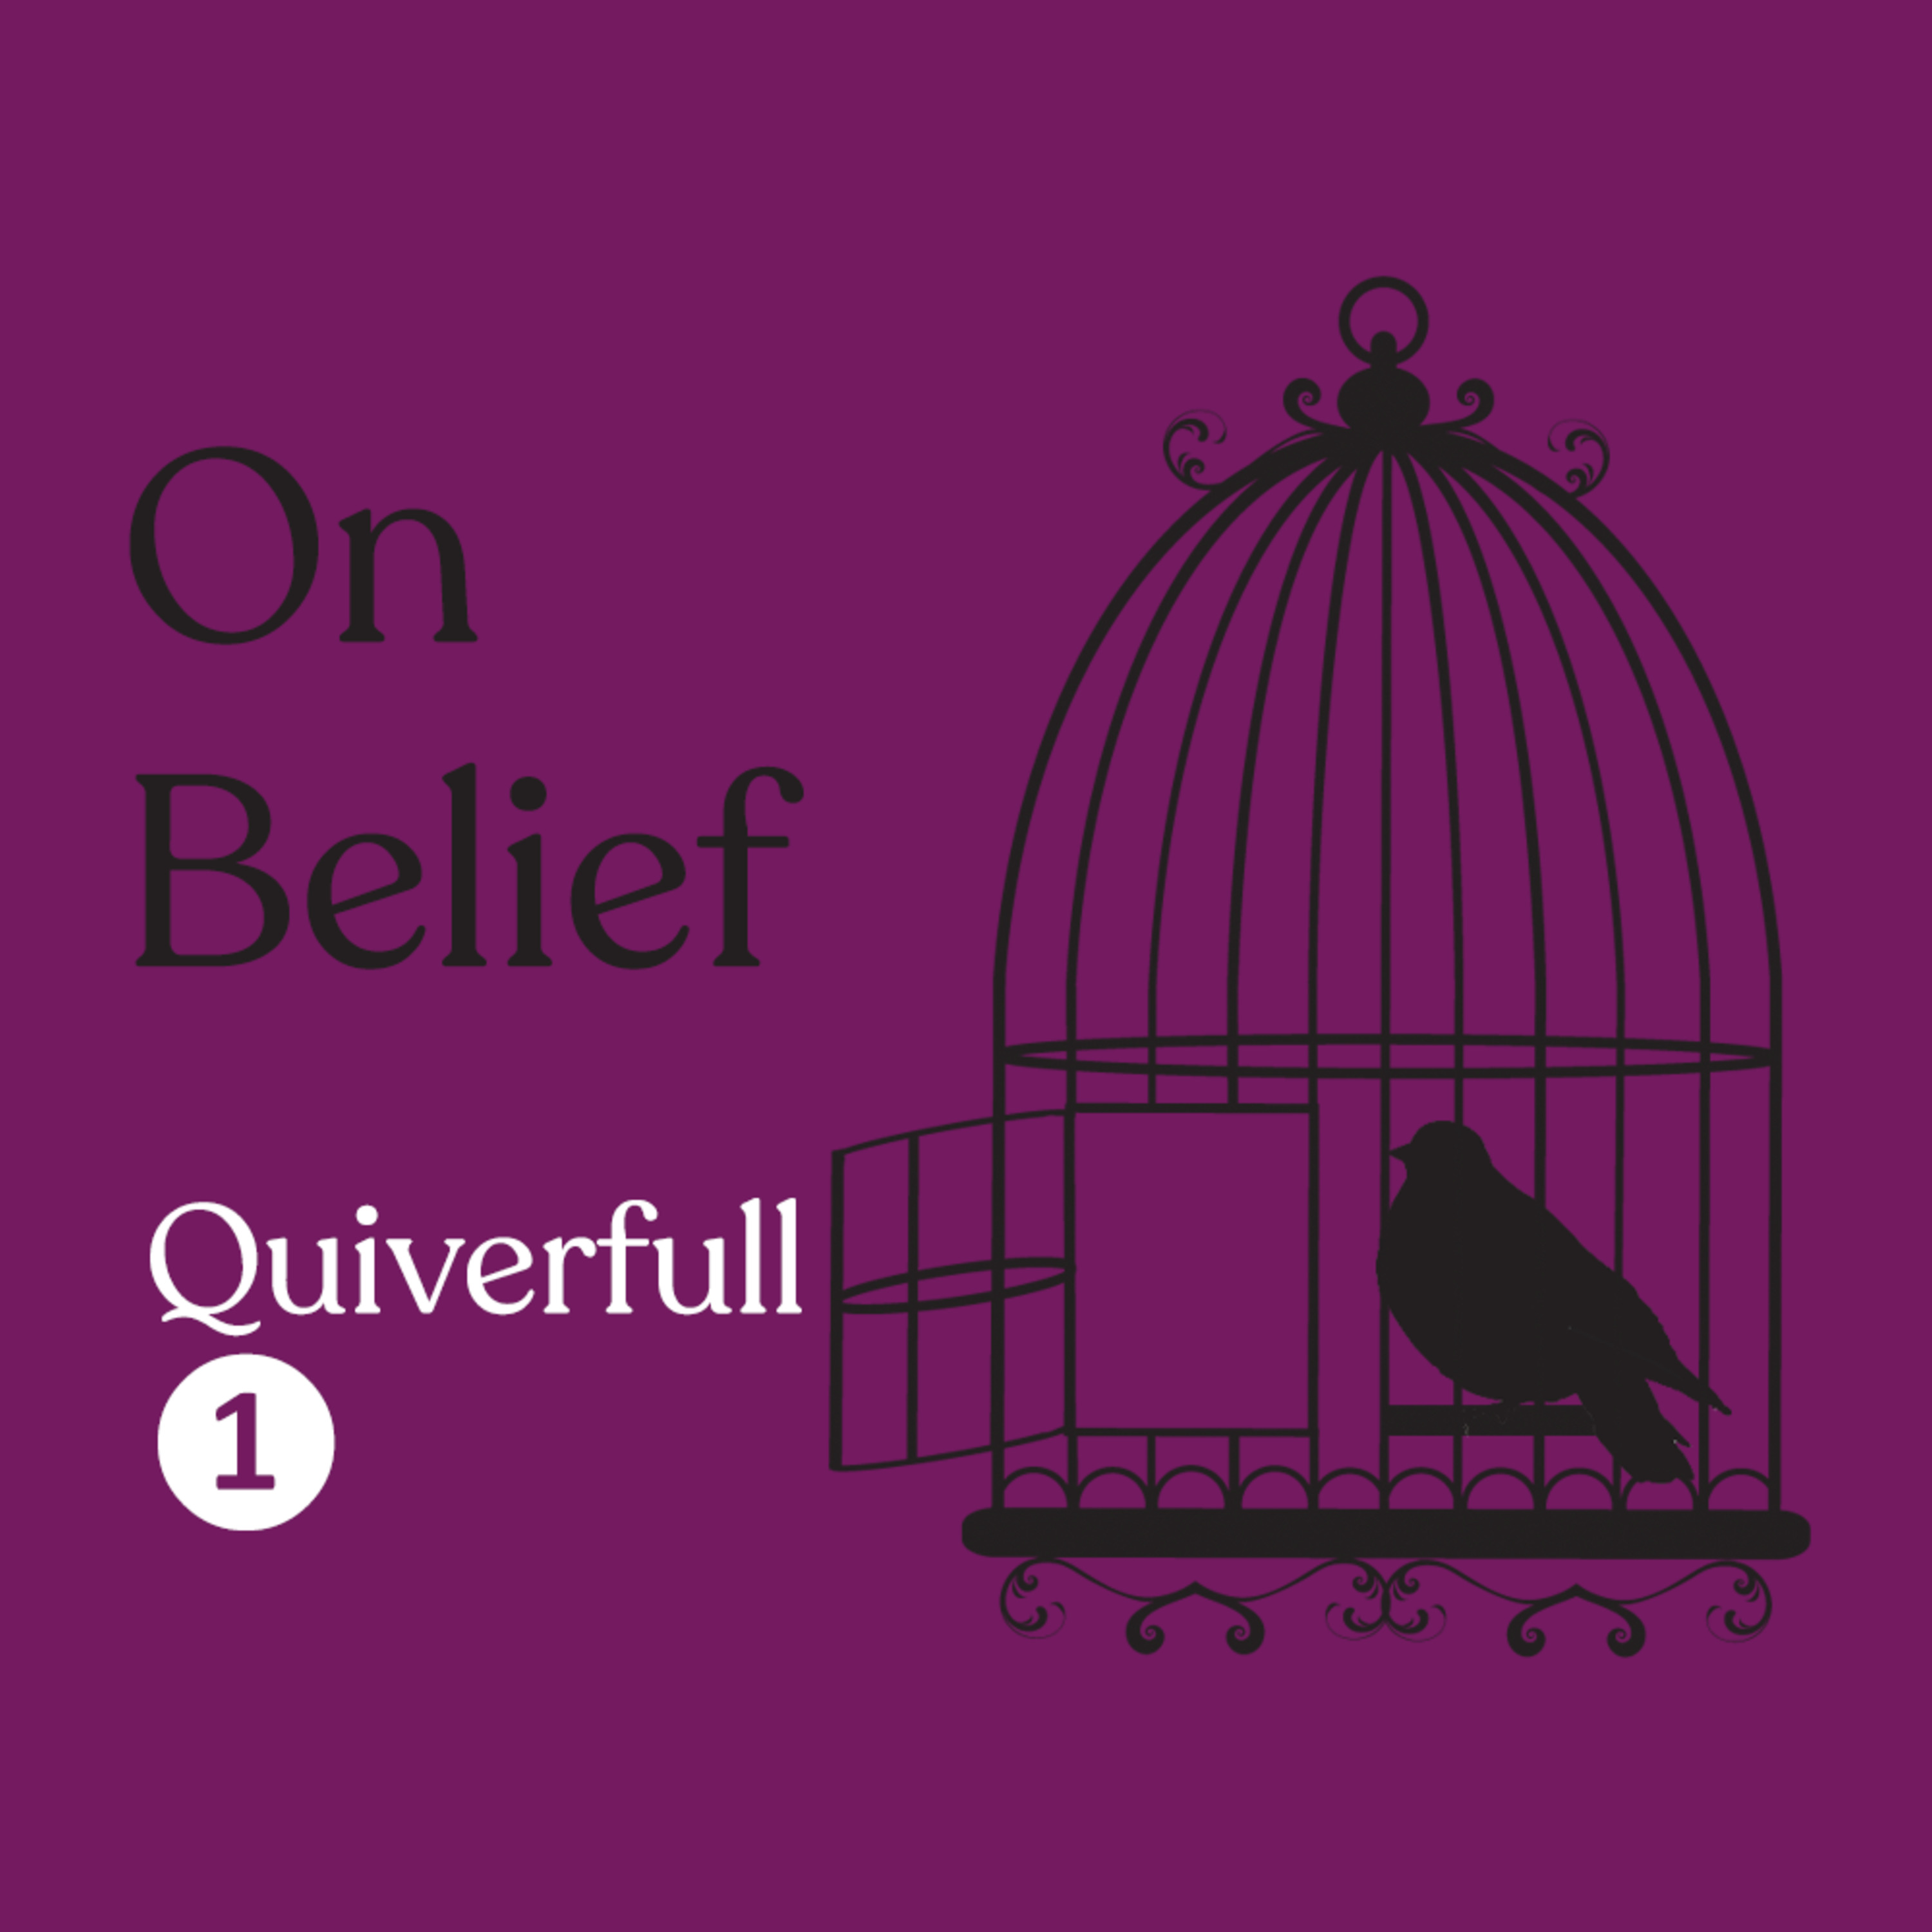 Episode 113: Quiverfull with Guest Kathryn Joyce